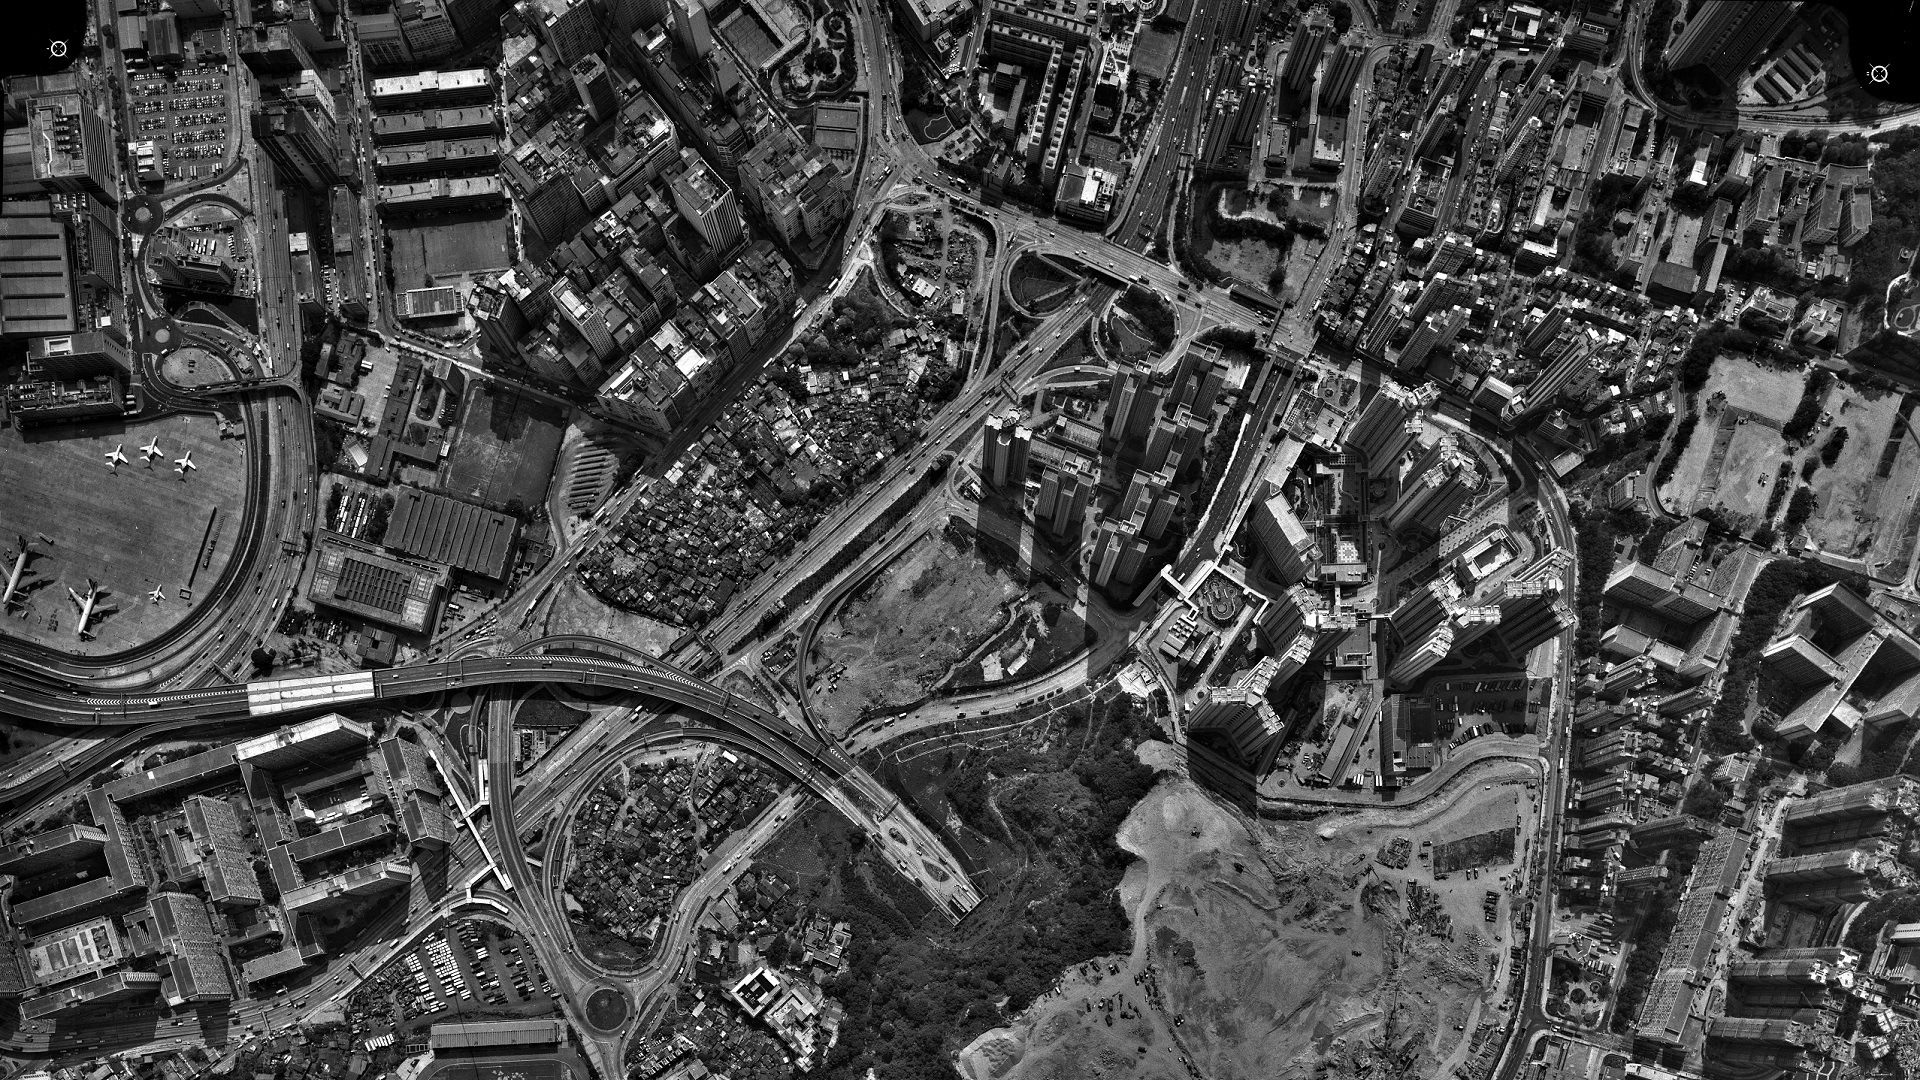 General 1920x1080 Hong Kong airport airplane tunnel highway aerial view monochrome building